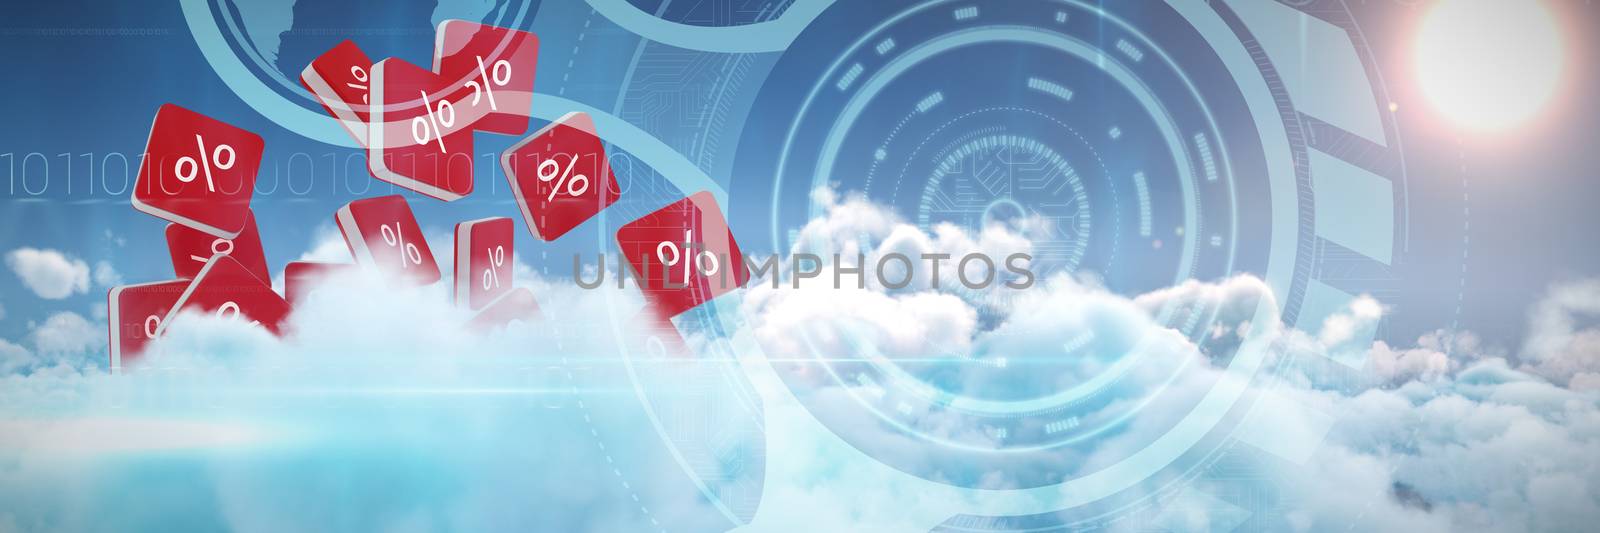 Composite image of percent sign vector icon by Wavebreakmedia